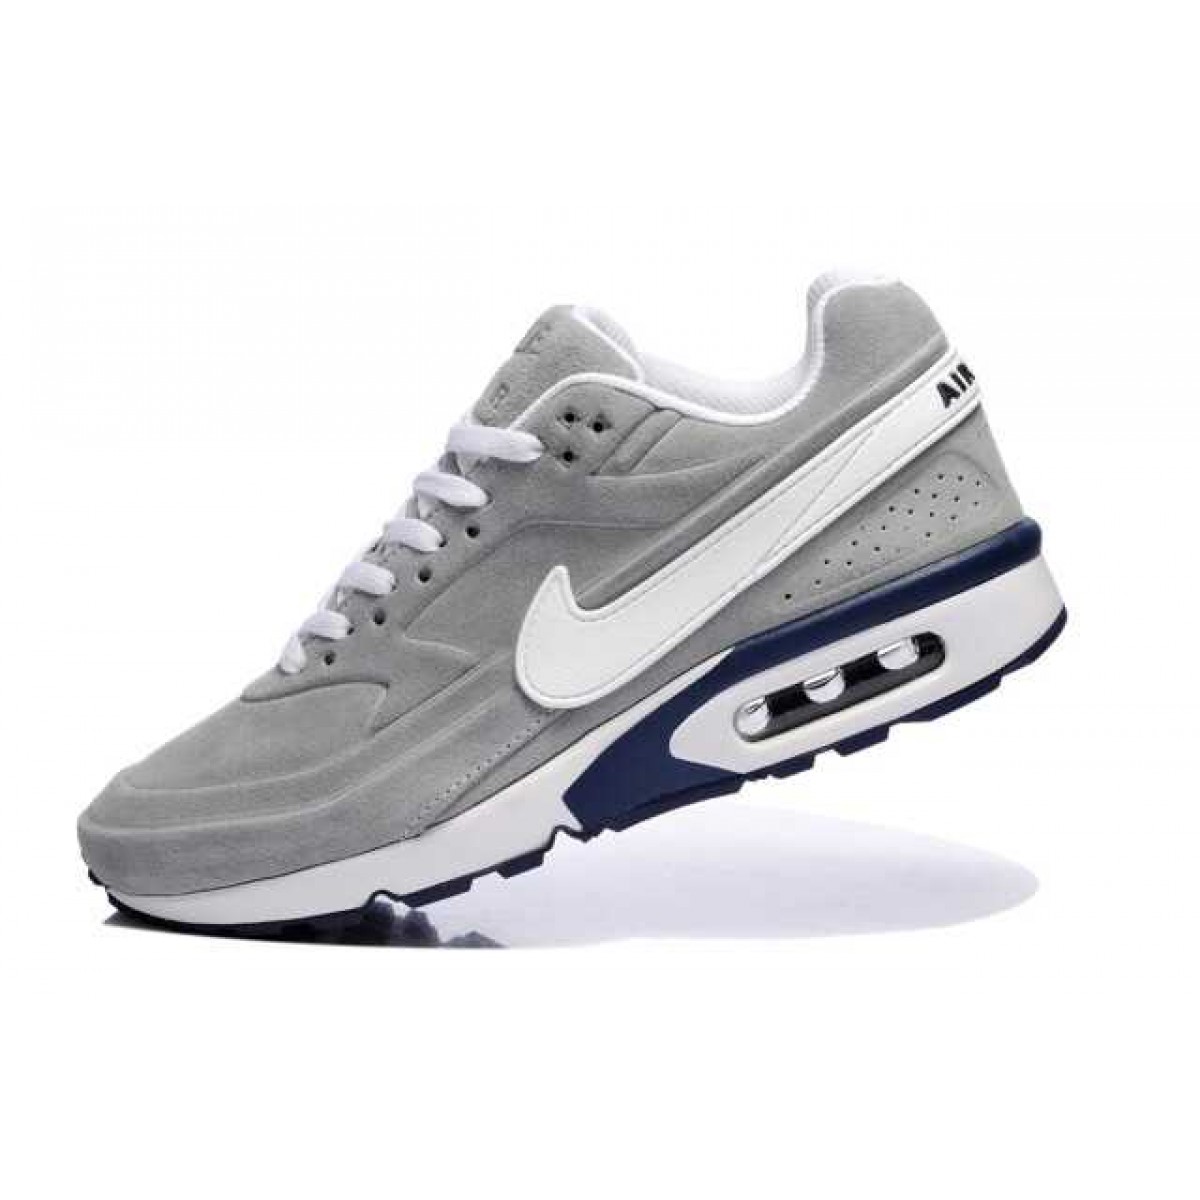 basket nike air max homme pas cher